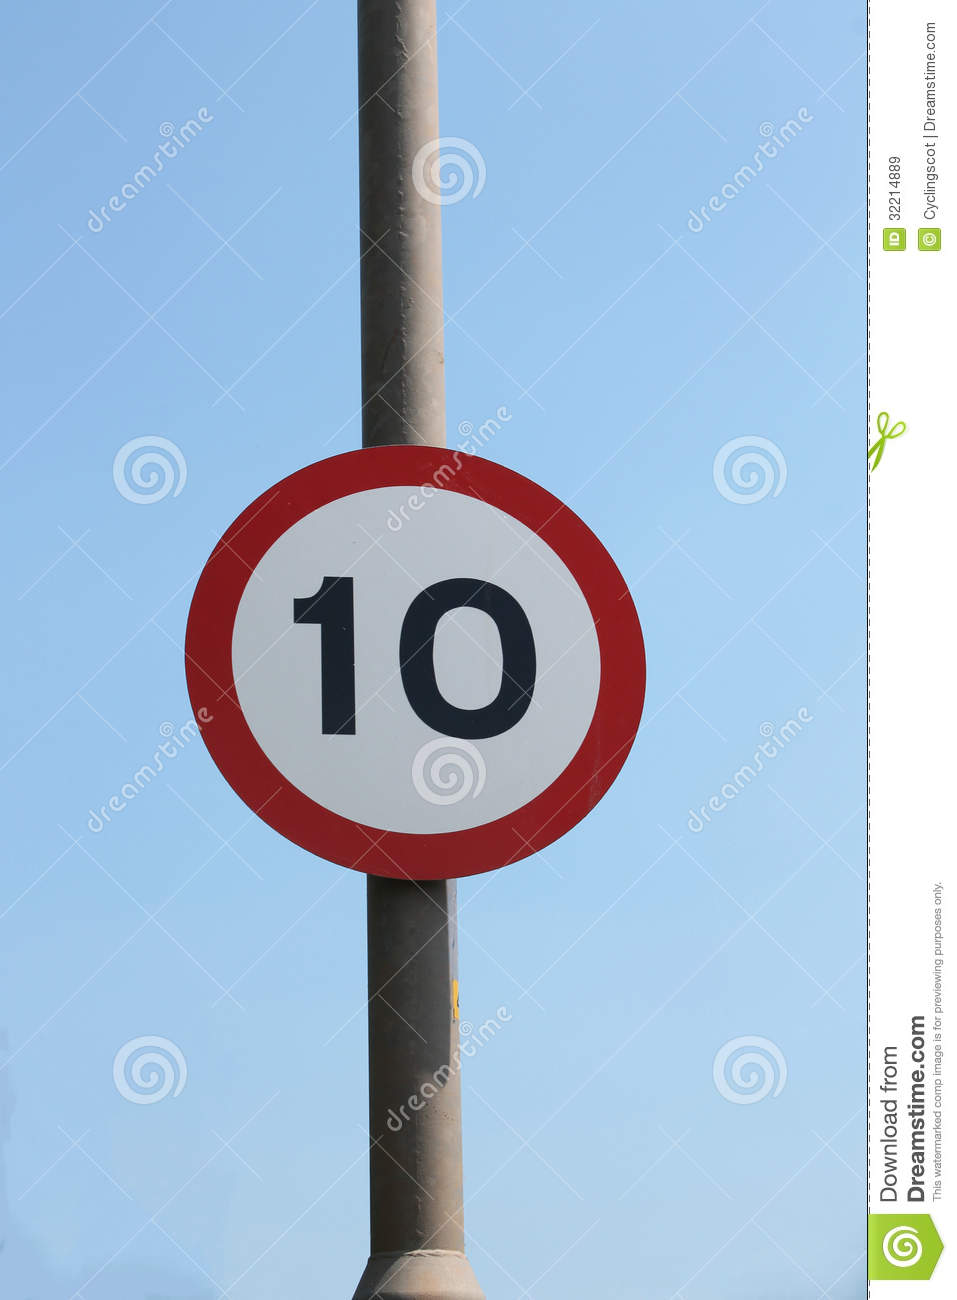 Uk 10 Mph Speed Limit Sign Royalty Free Stock Images   Image  32214889